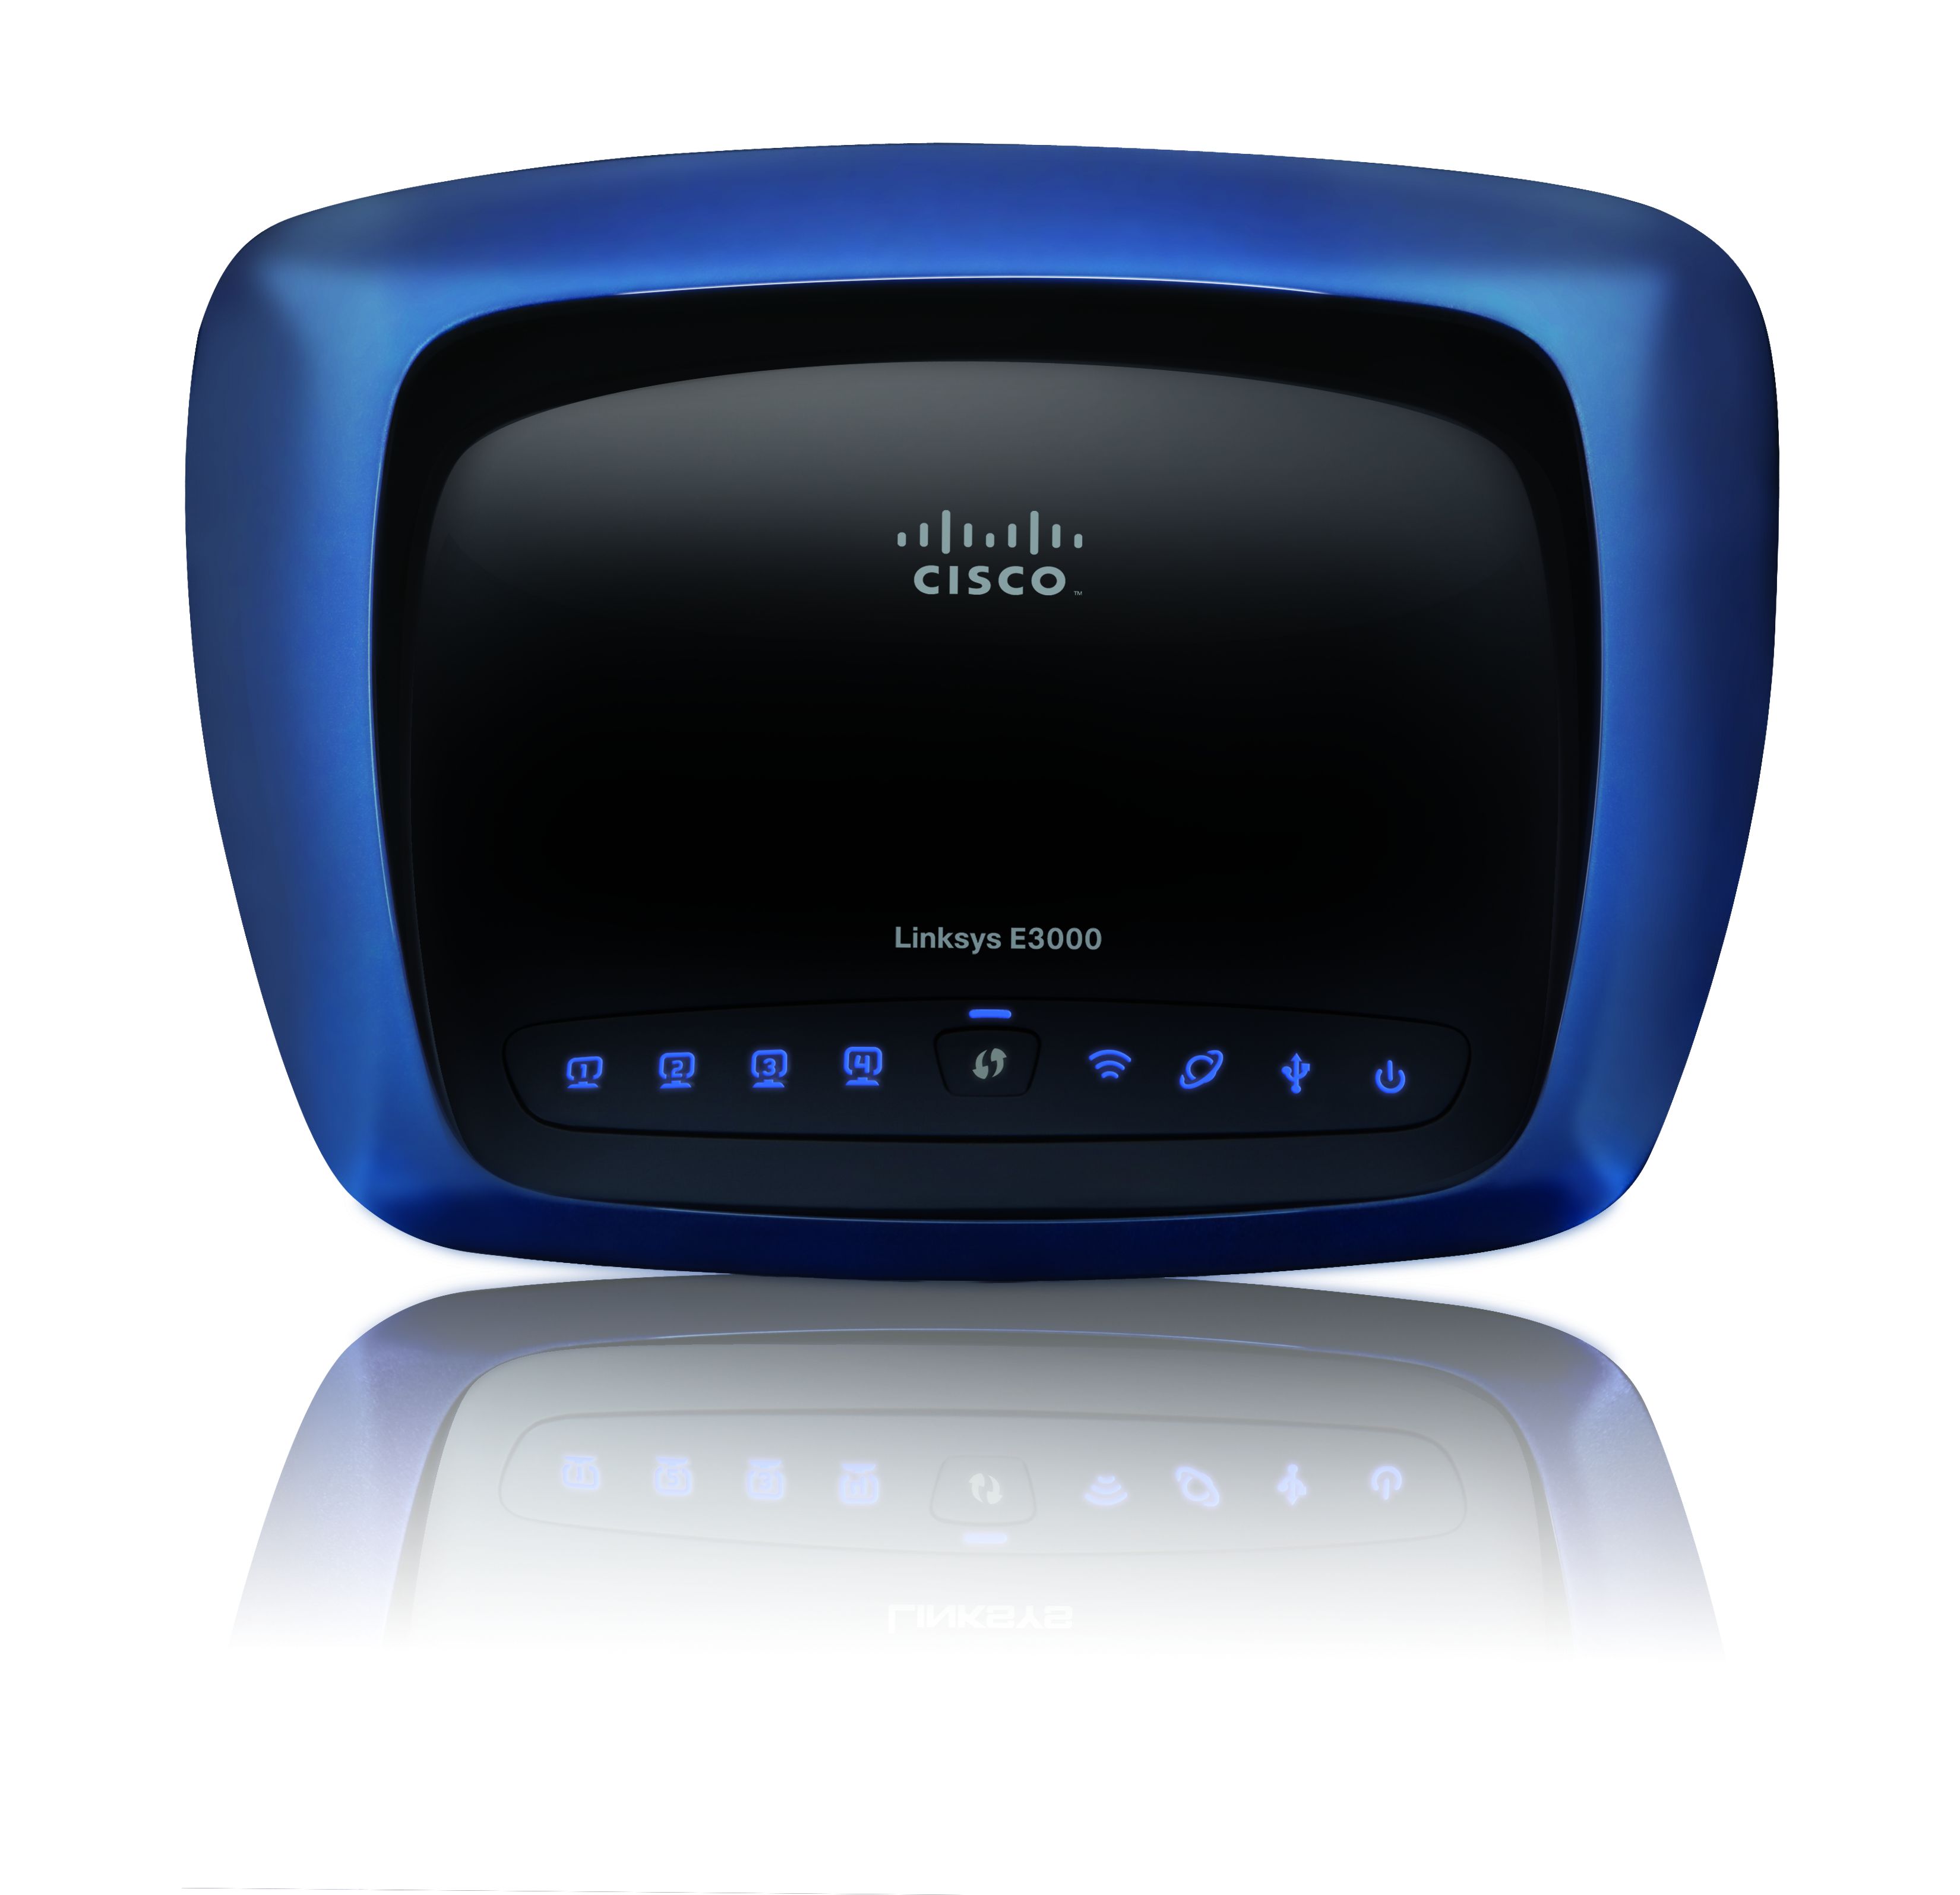 Action dystrybutorem Linksys by Cisco